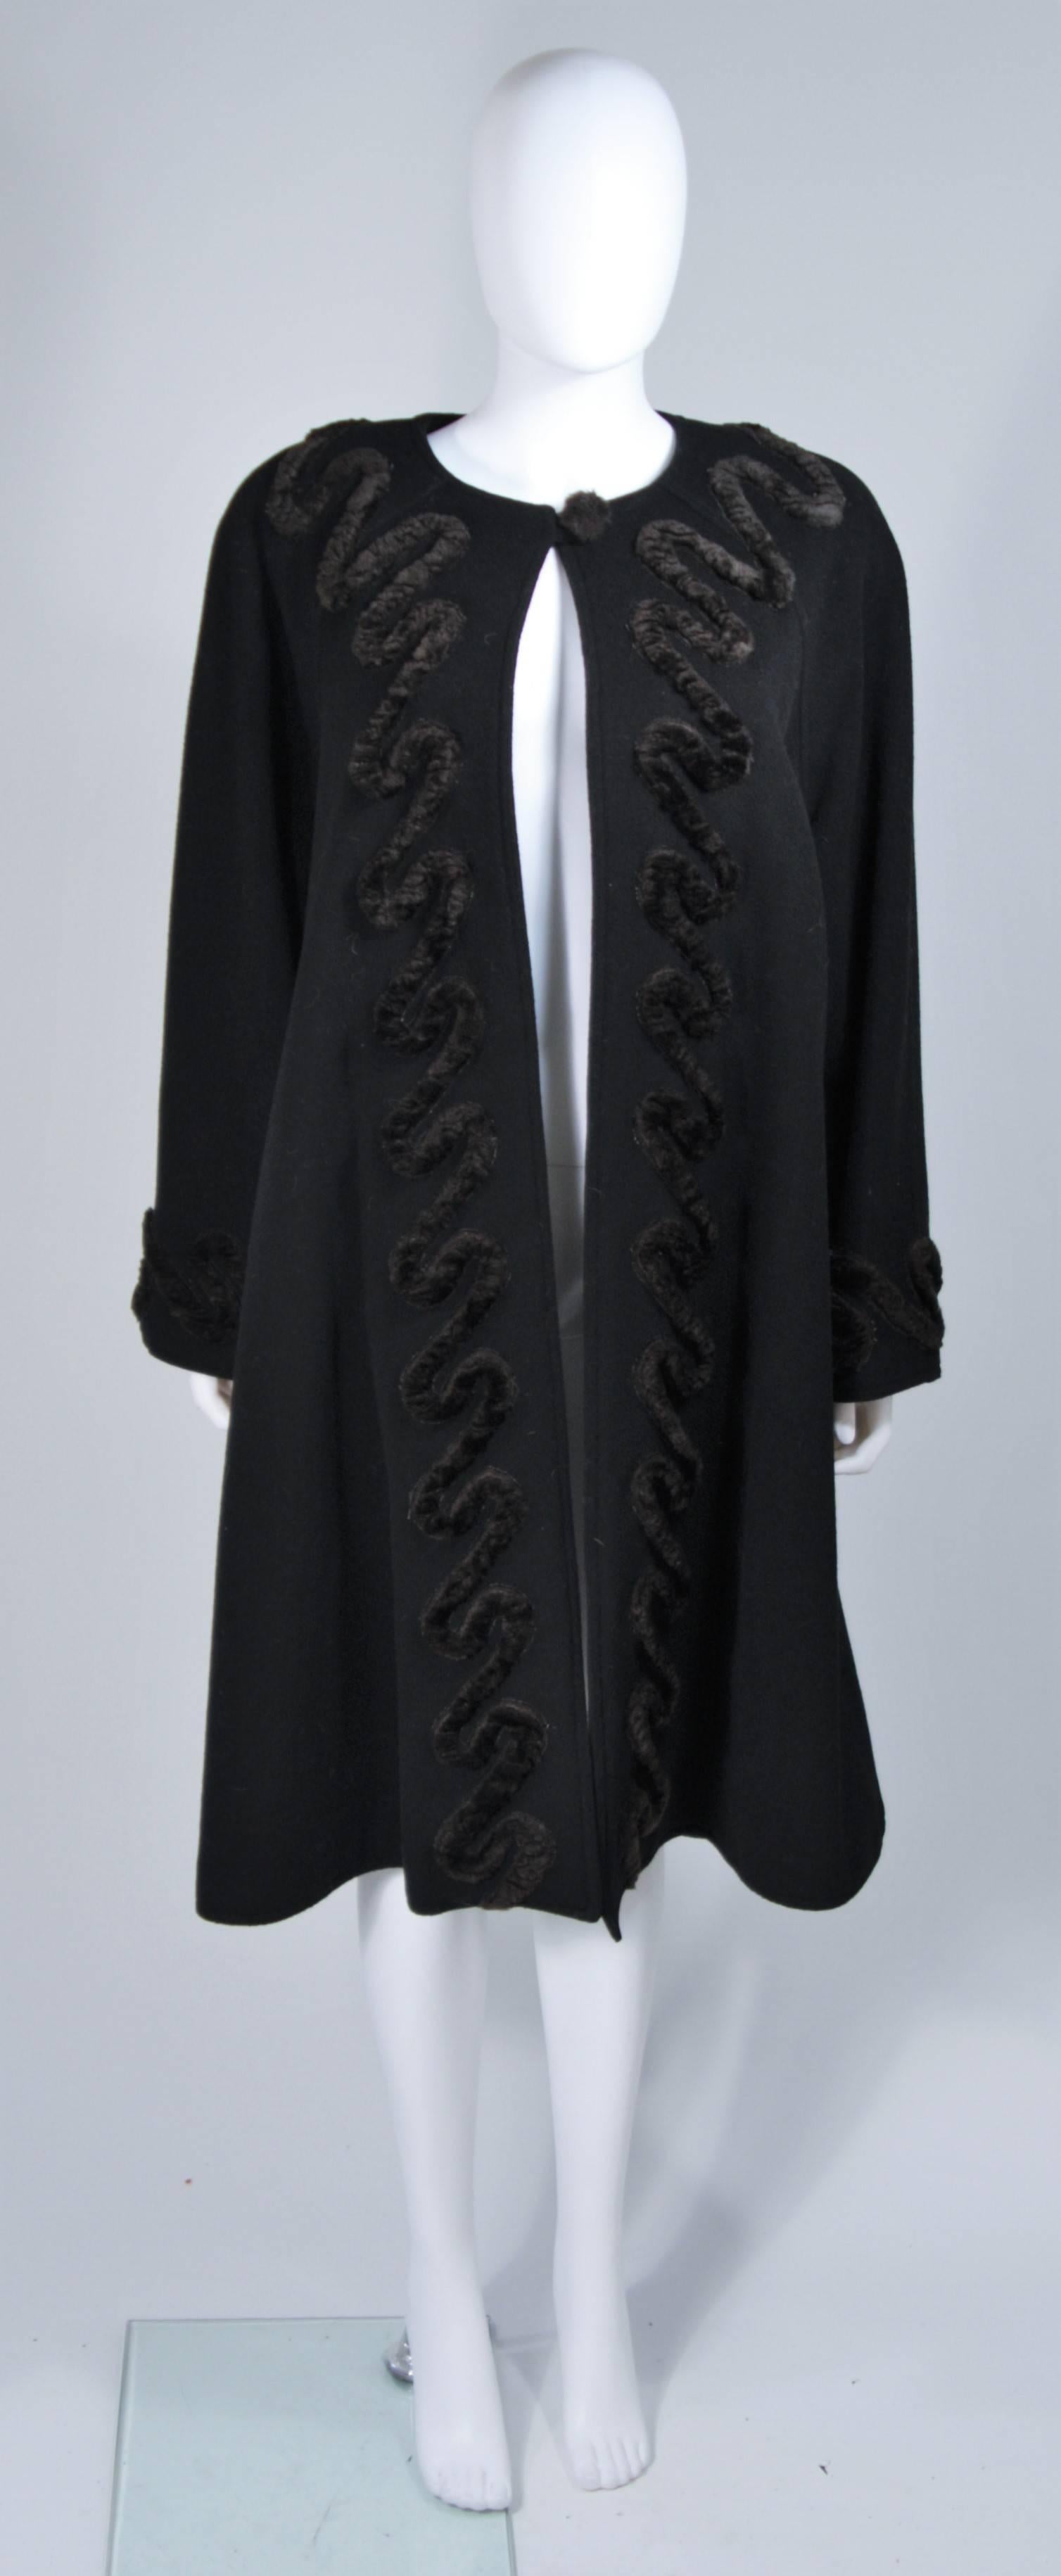 This Fendi coat is composed of a black lana wool and features a faux fur applique in a swirl pattern. There is a hook and eye closure with side pockets. In excellent vintage condition. 

**Please cross-reference measurements for personal accuracy.